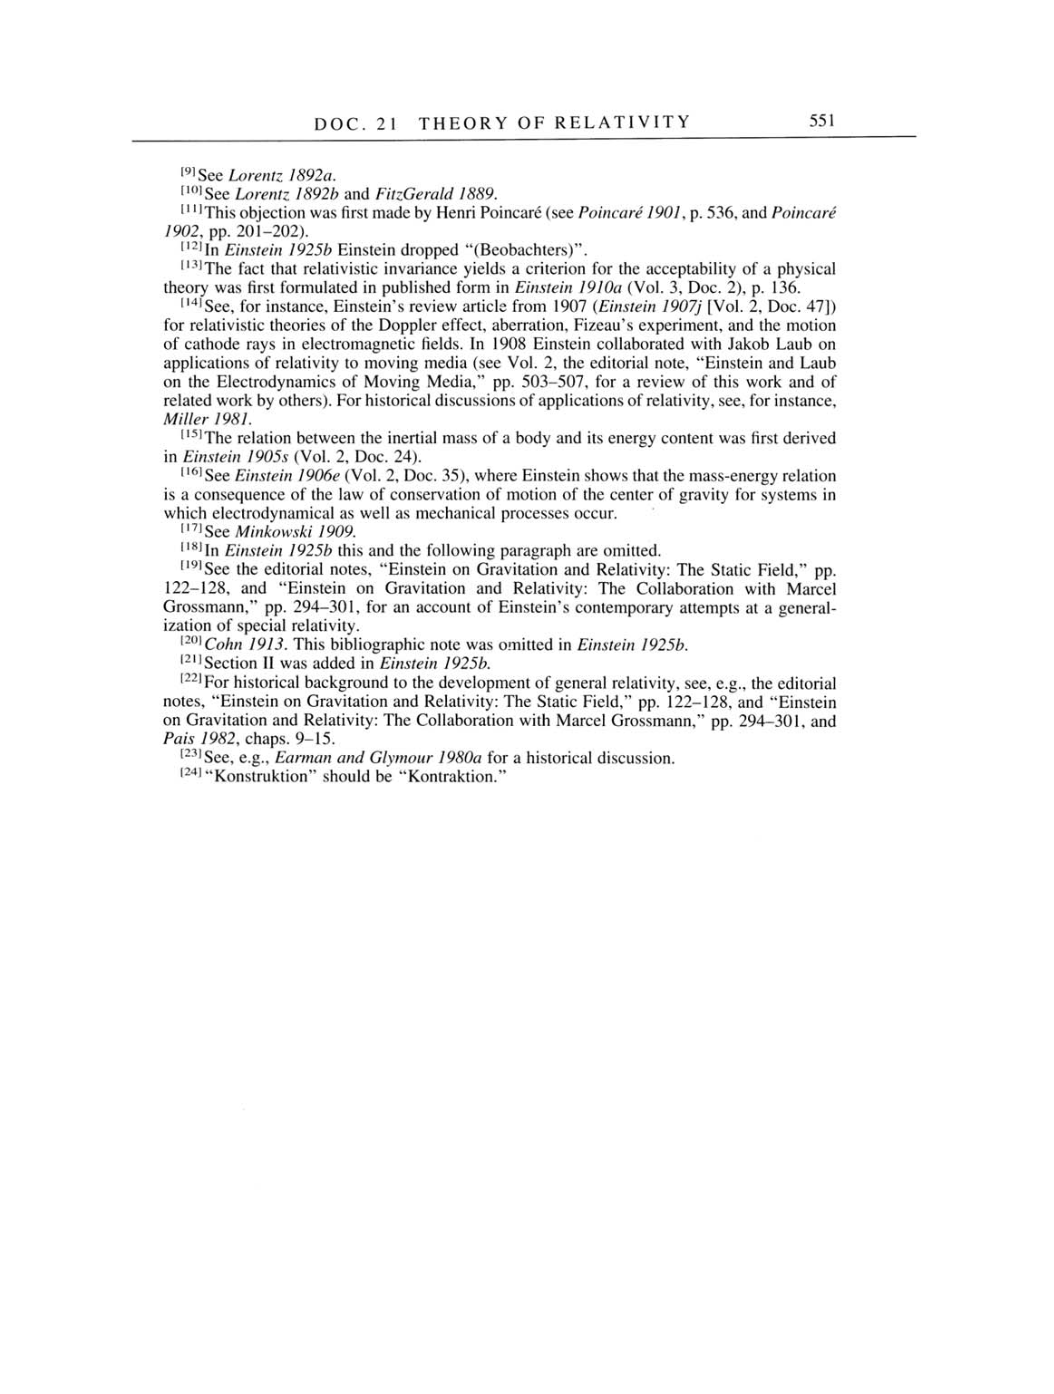 Volume 4: The Swiss Years: Writings 1912-1914 page 551